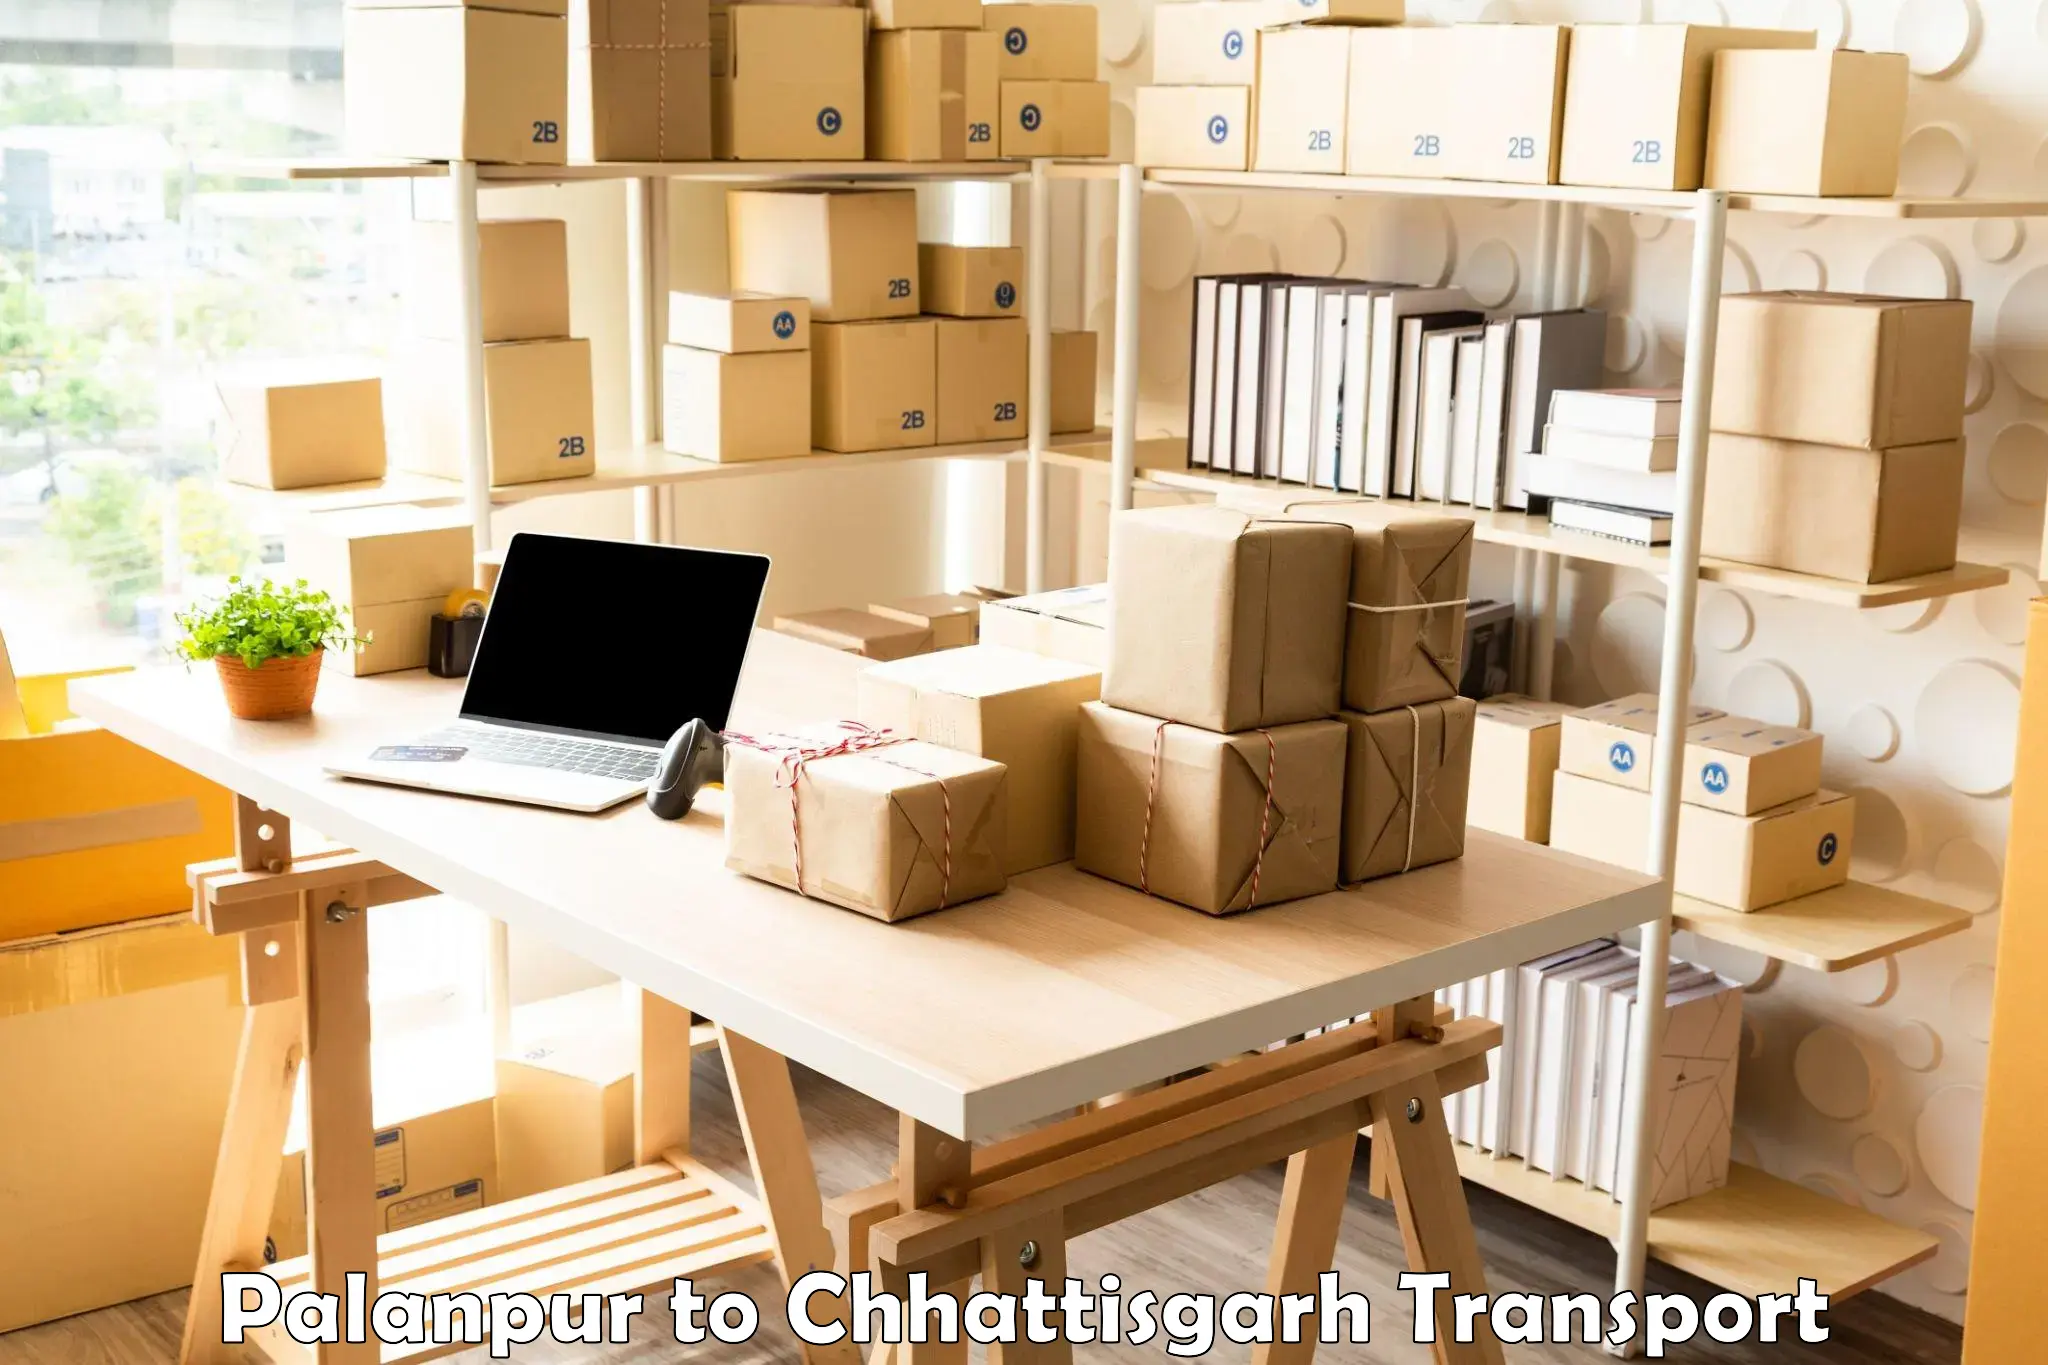 Transport shared services Palanpur to Raigarh